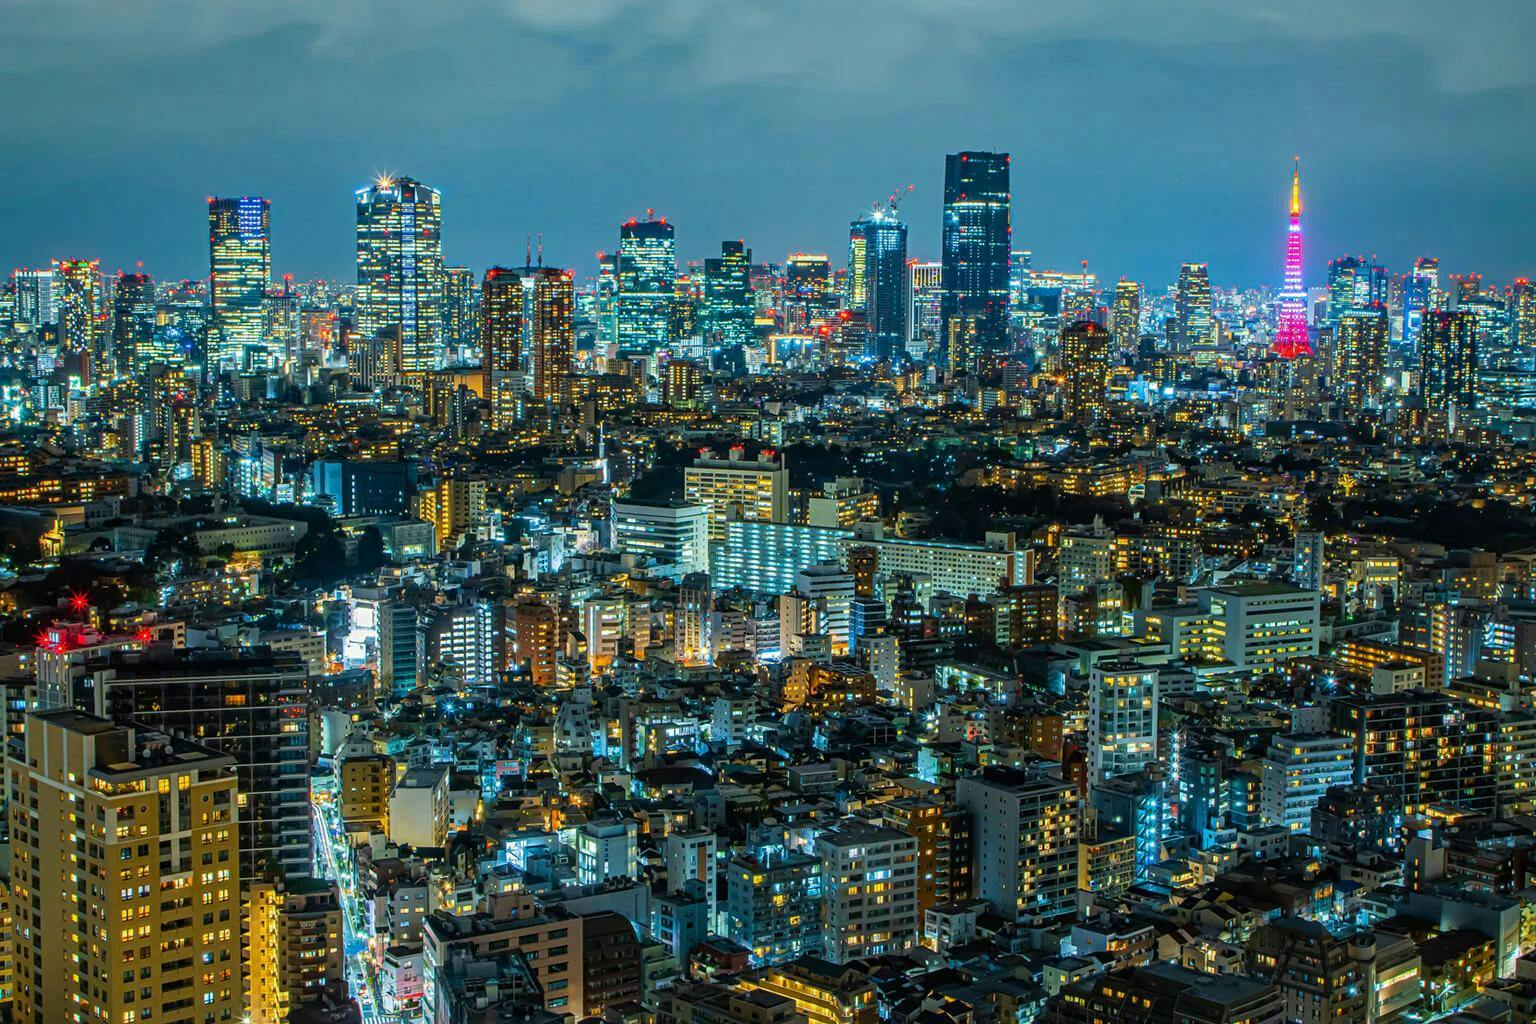 Night view of Tokyo, the most populous city in the world.